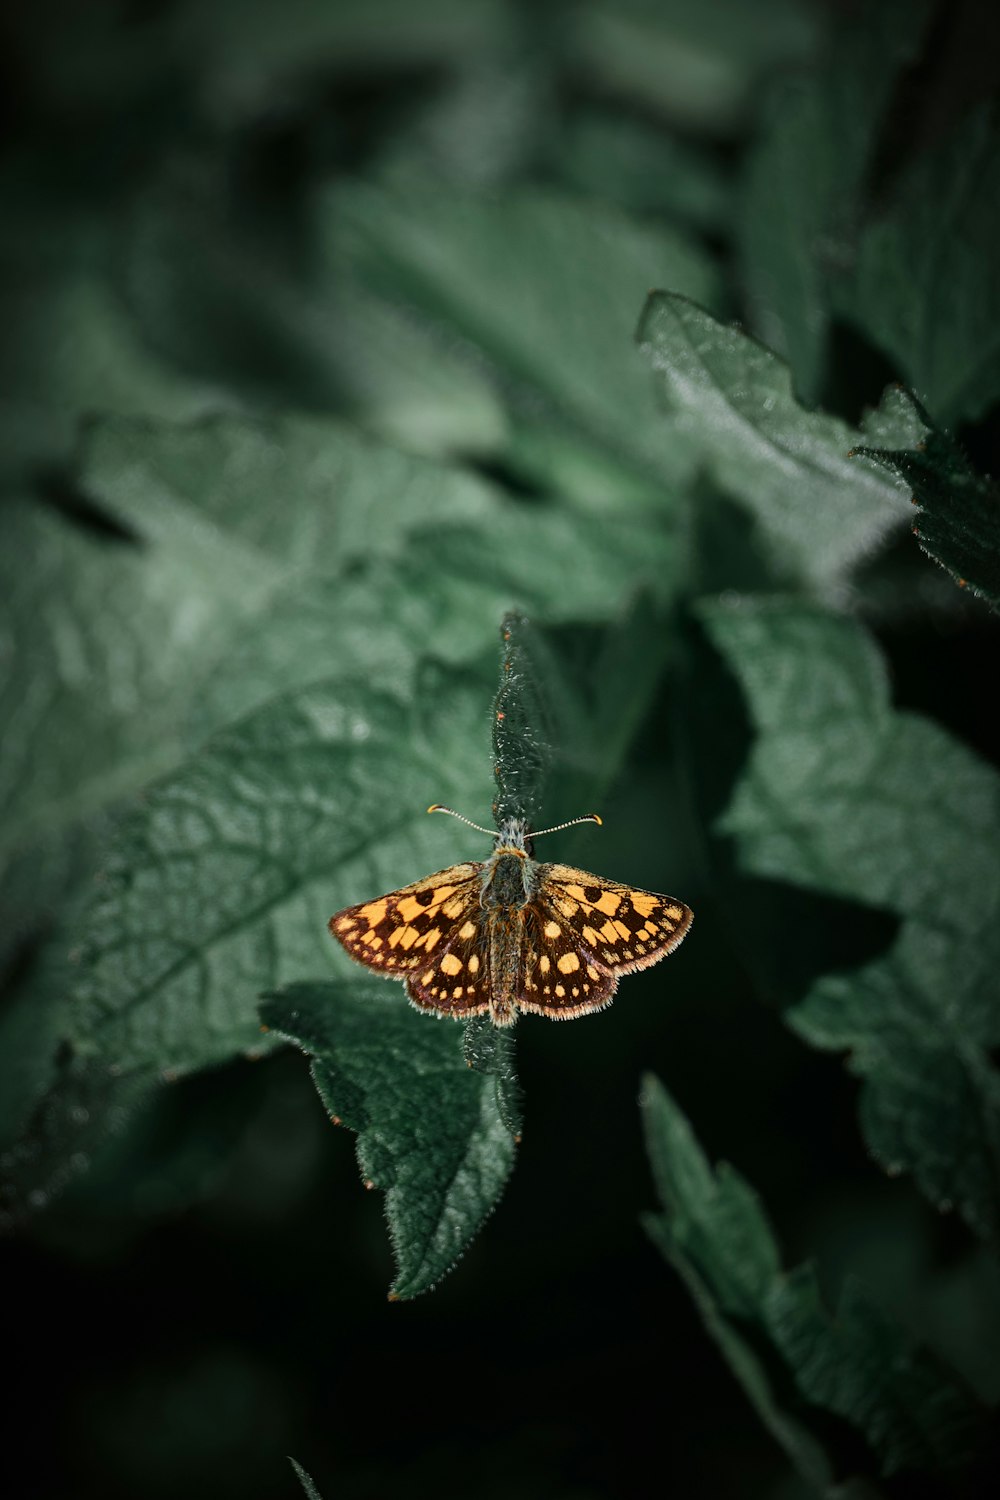 brown and black butterfly on green leaf